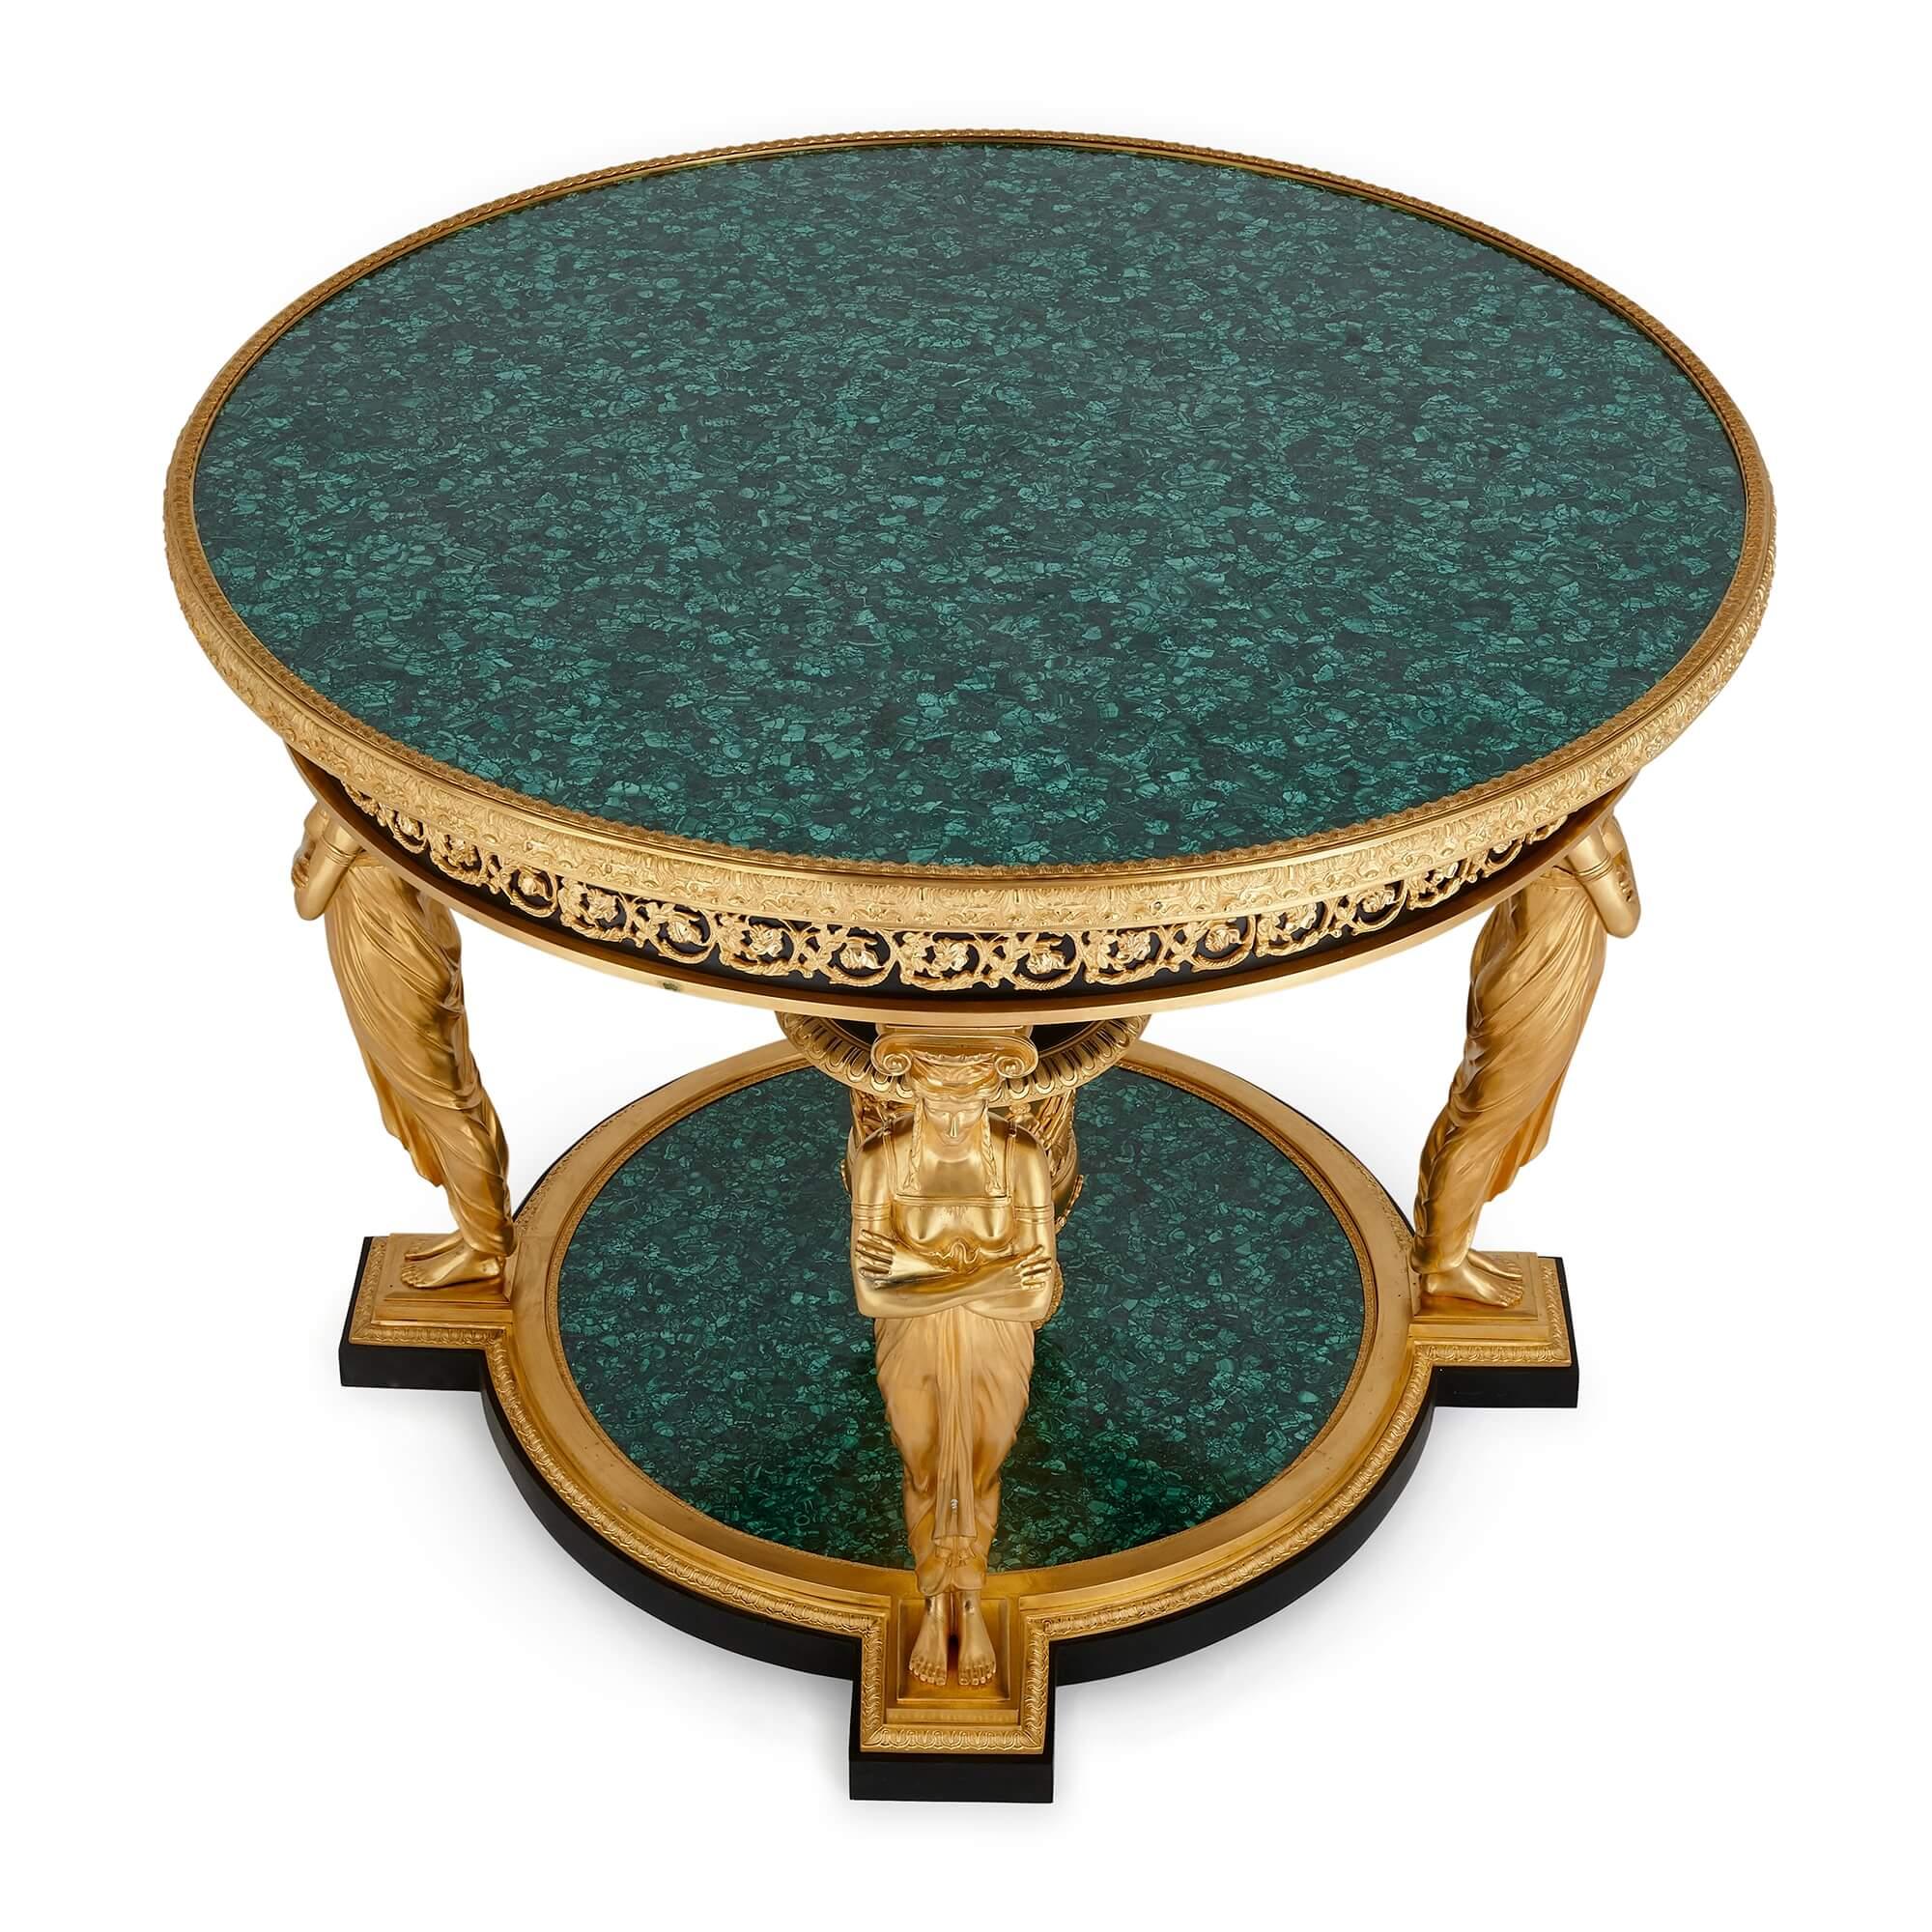 A gilt-bronze and malachite Empire-style 'Aux Caryatides' centre table after Desmalter
French, 20th Century
Height: 82cm, diameter: 109cm

This magnificent piece is an ormolu mounted, malachite and bronze Empire style centre table, after the